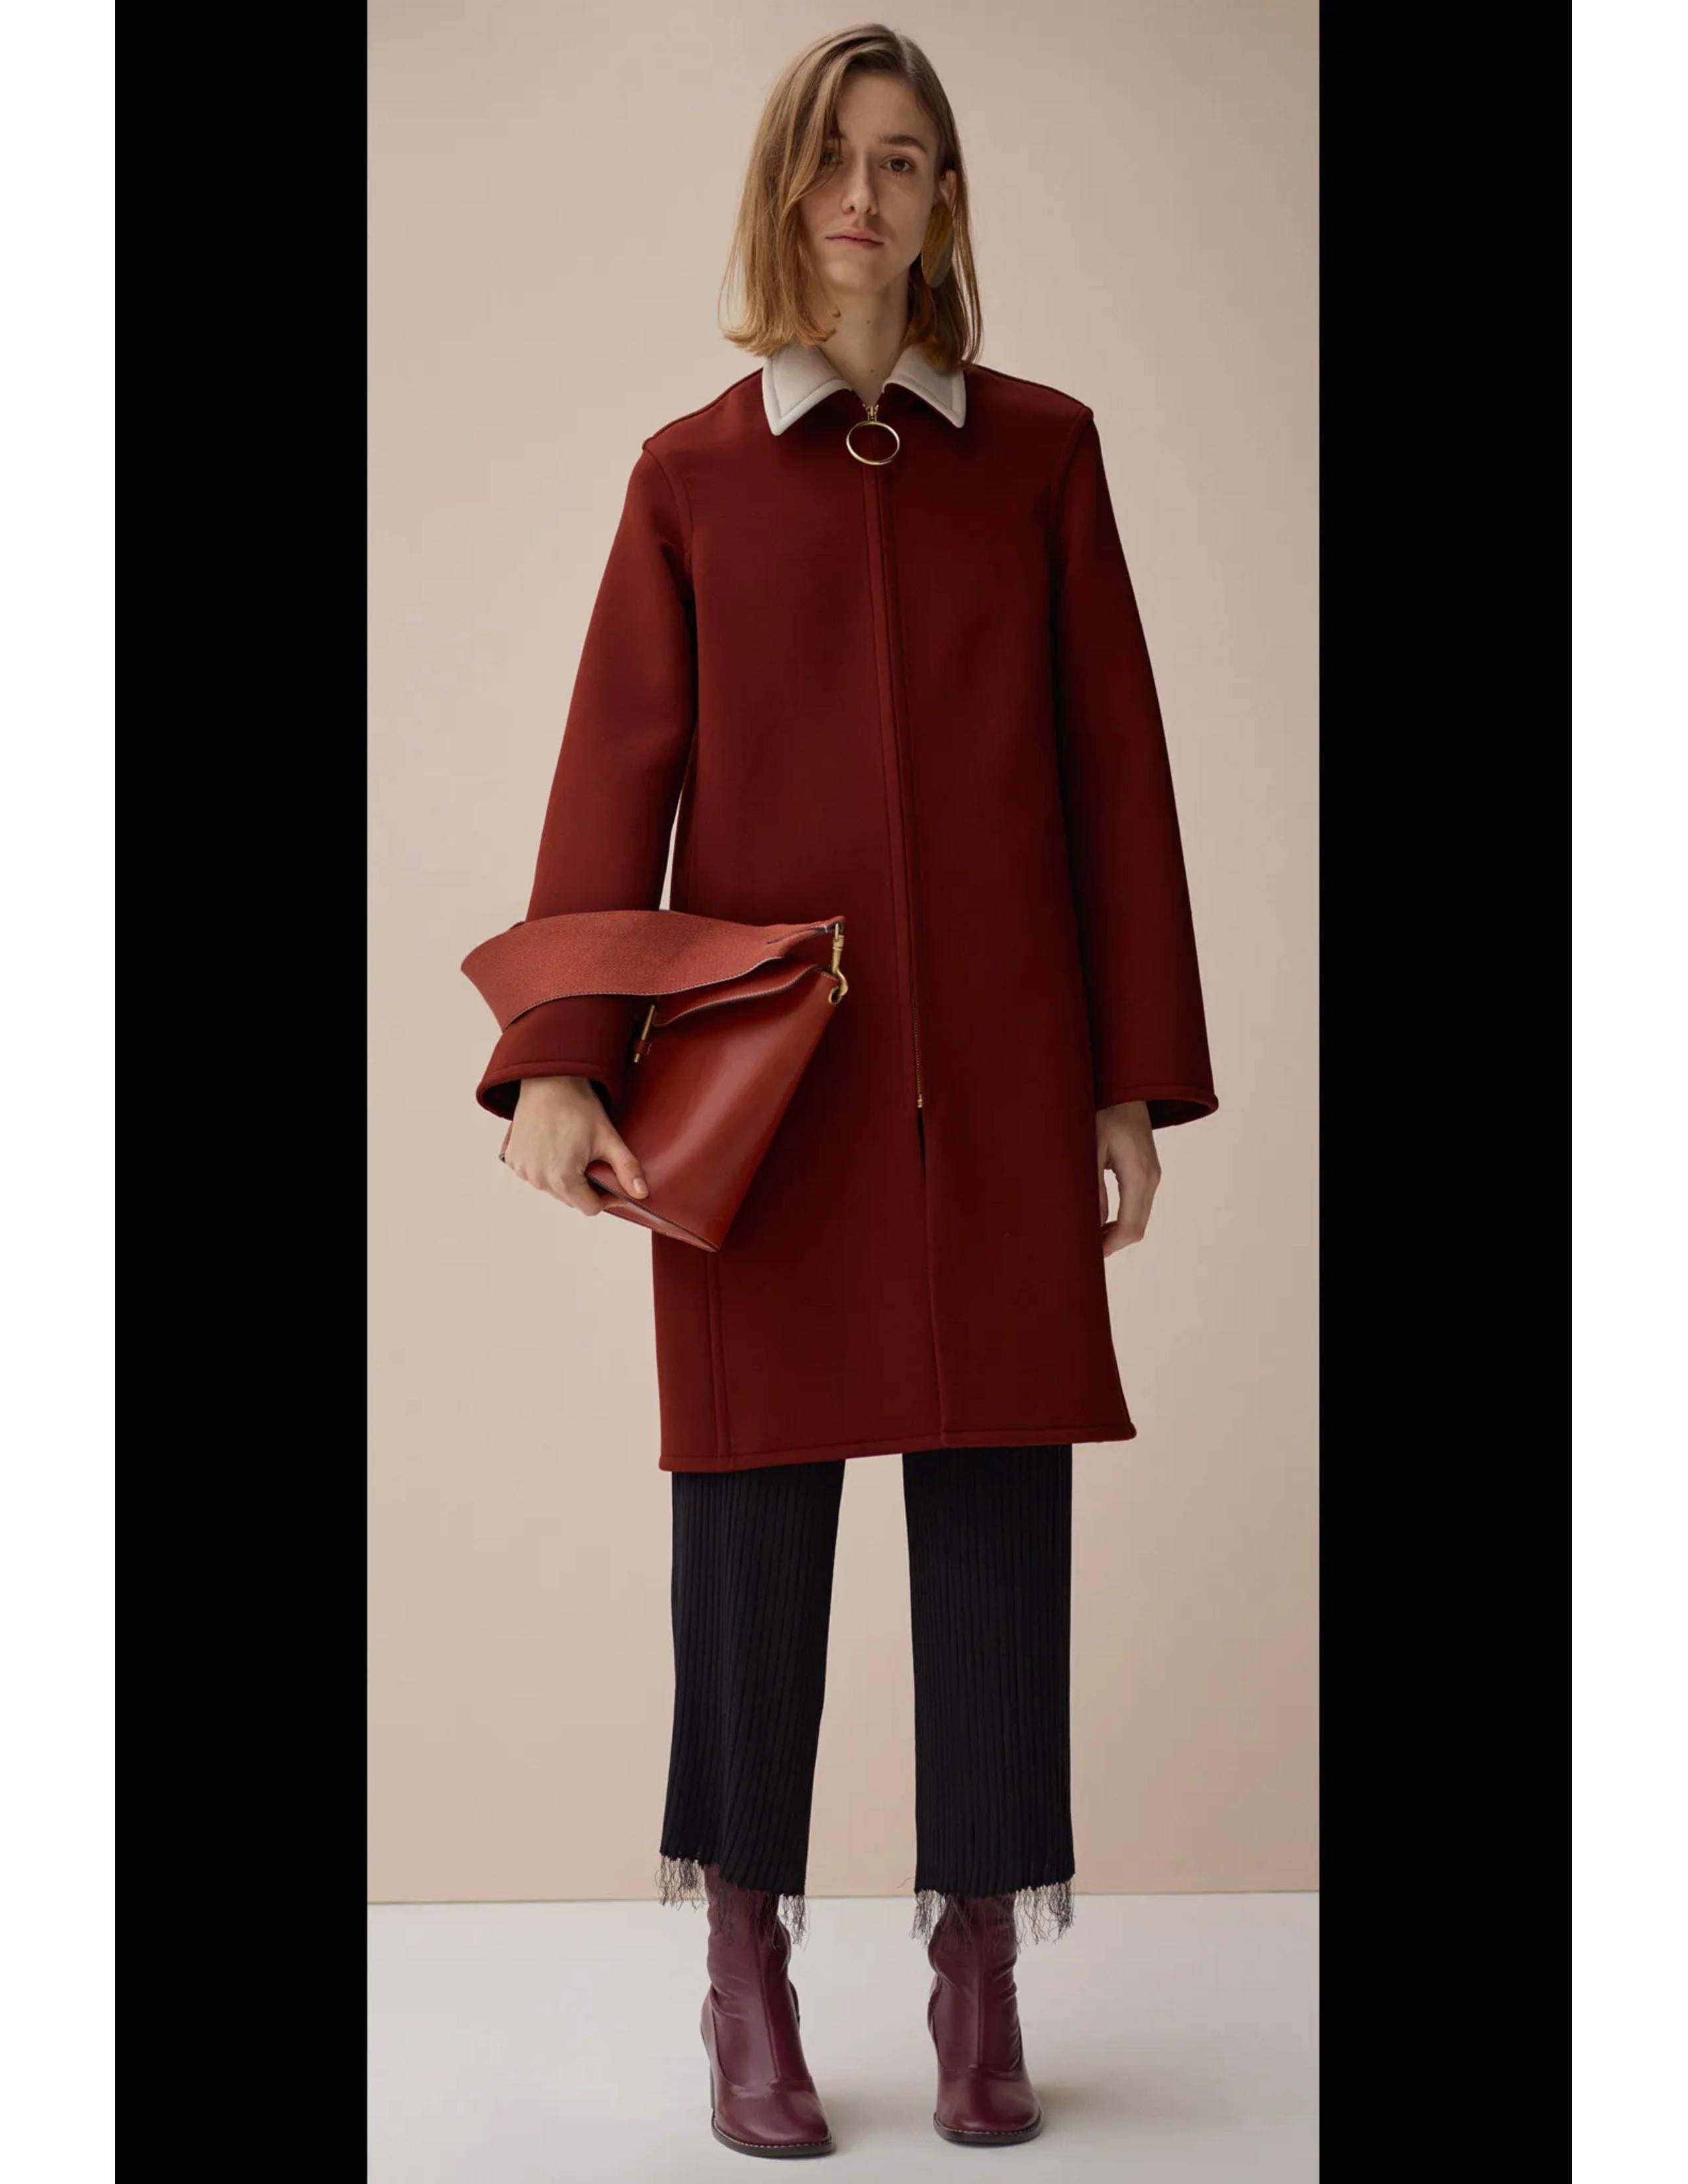 2015 CELINE by PHOEBE PHILO wool coat with O-ring zipper For Sale 6